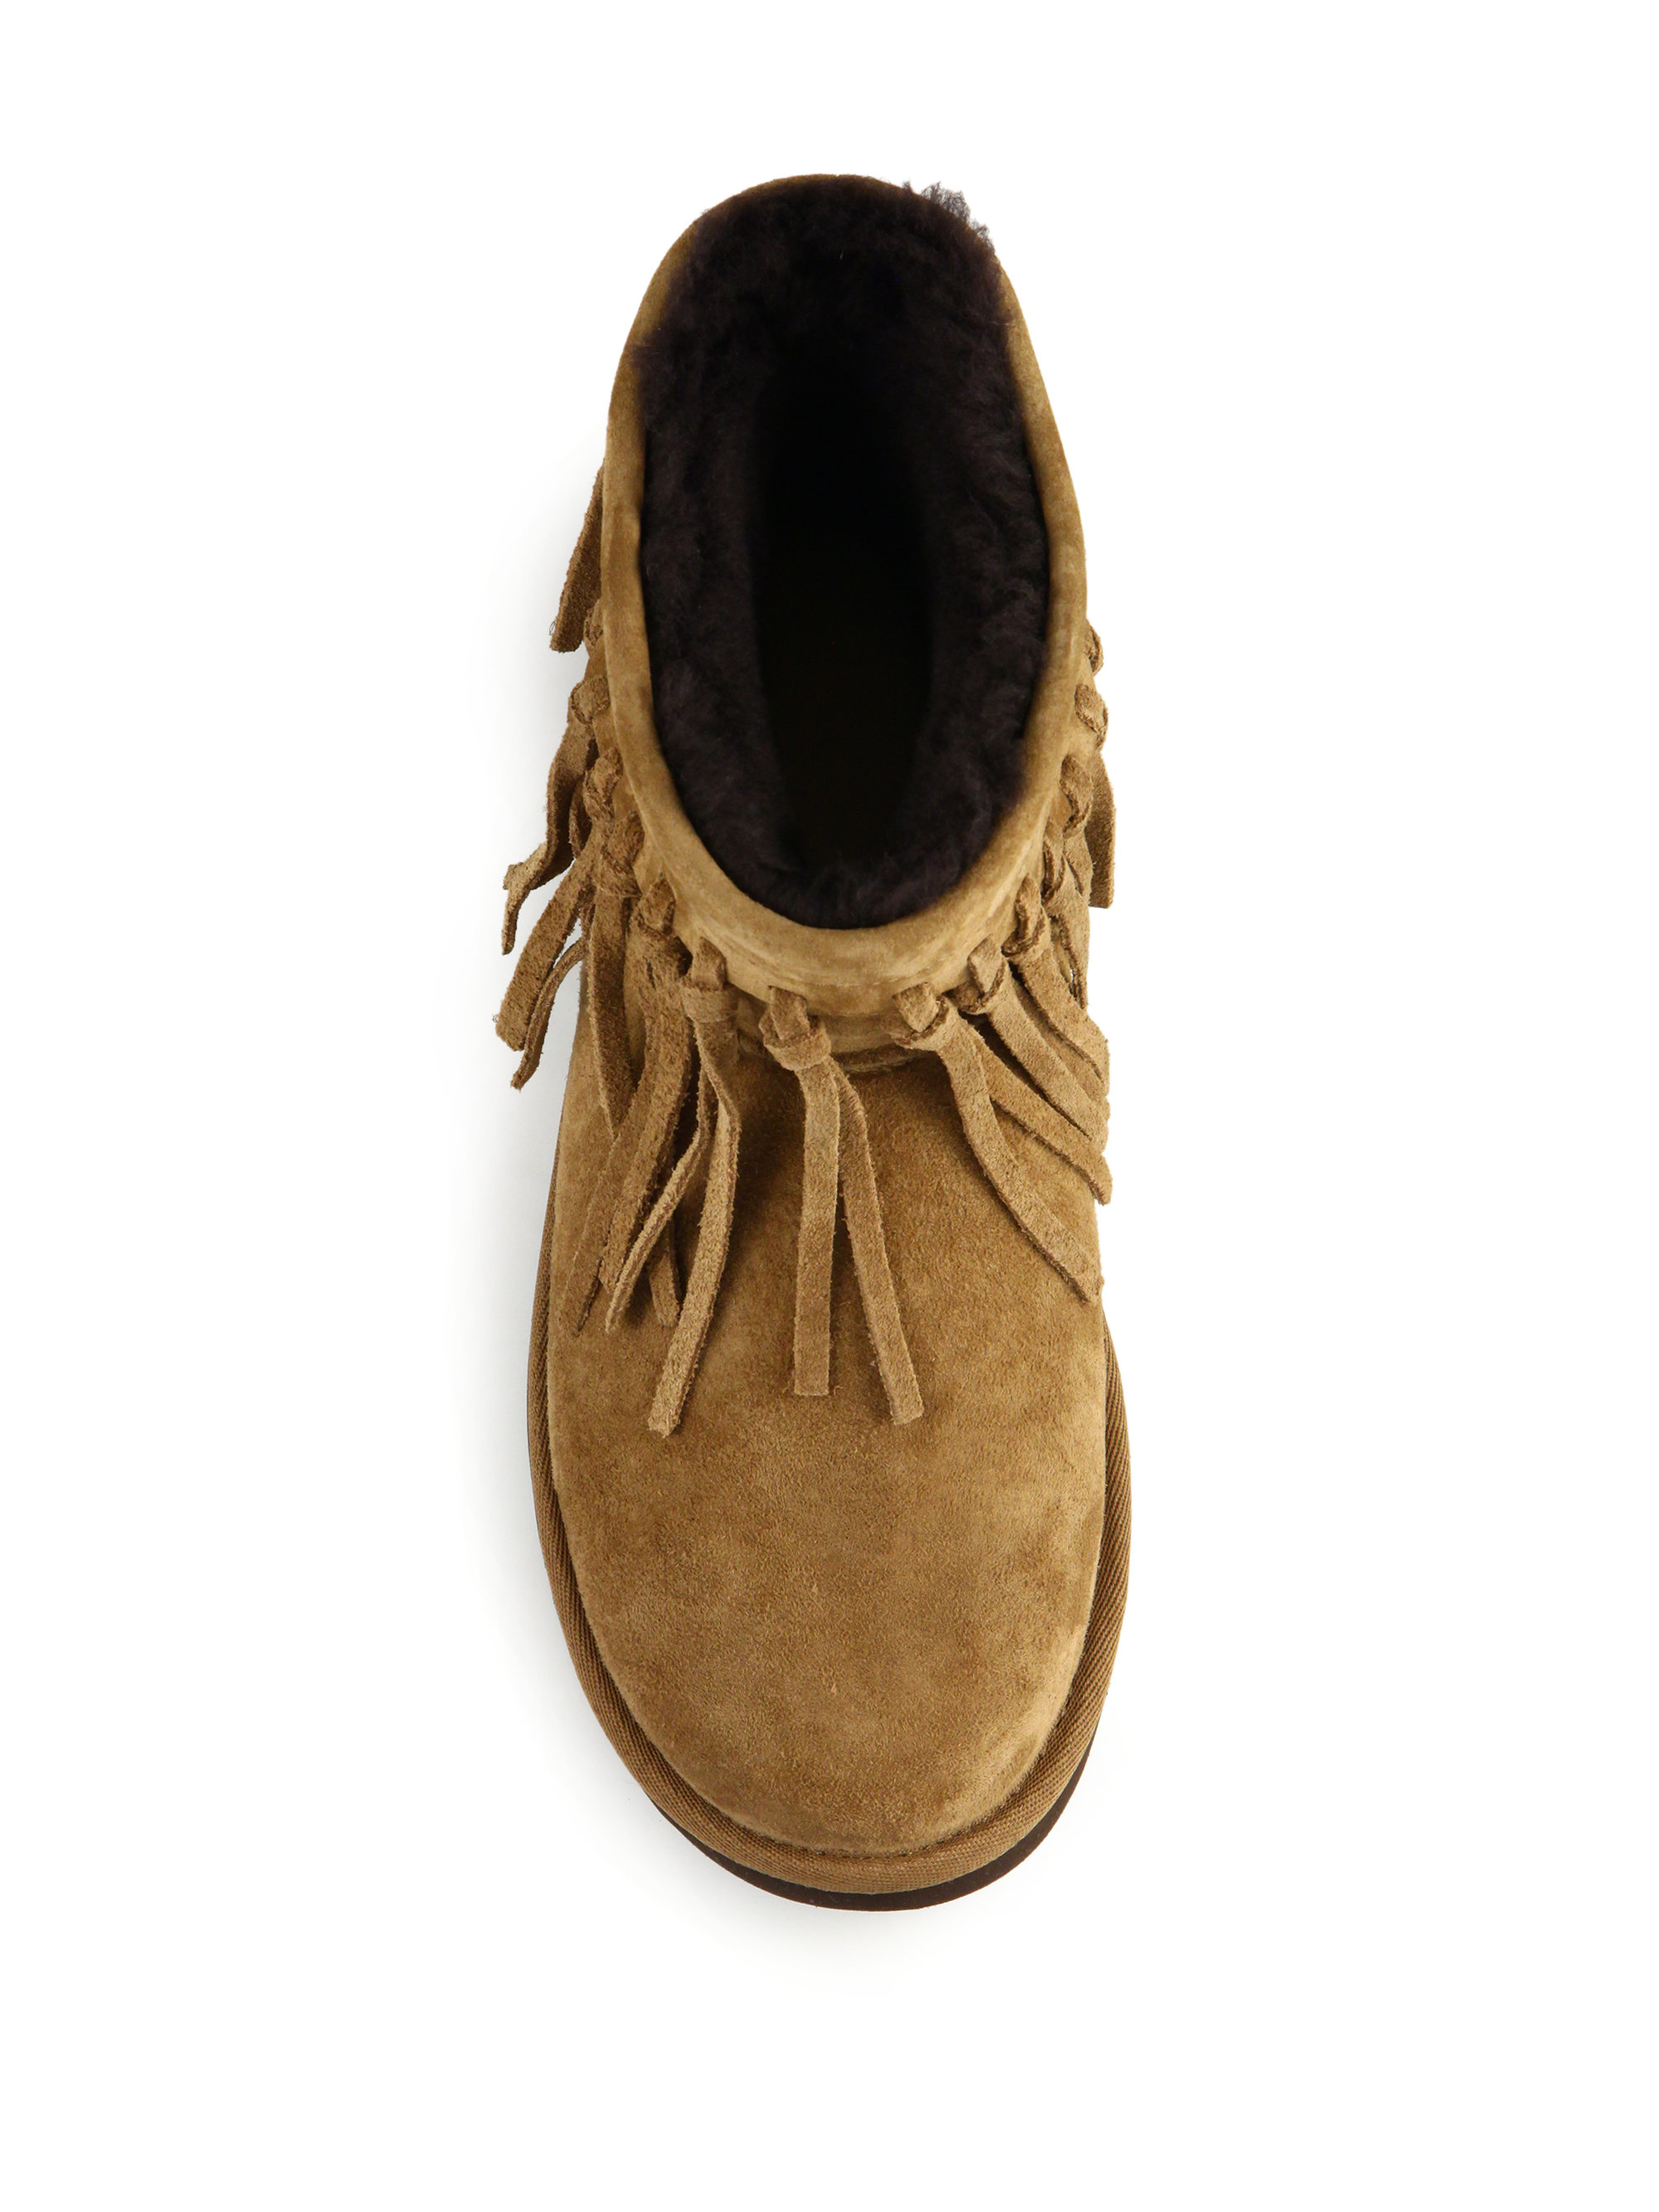 Lyst - Ugg Wynona Fringed Suede Boots in Brown